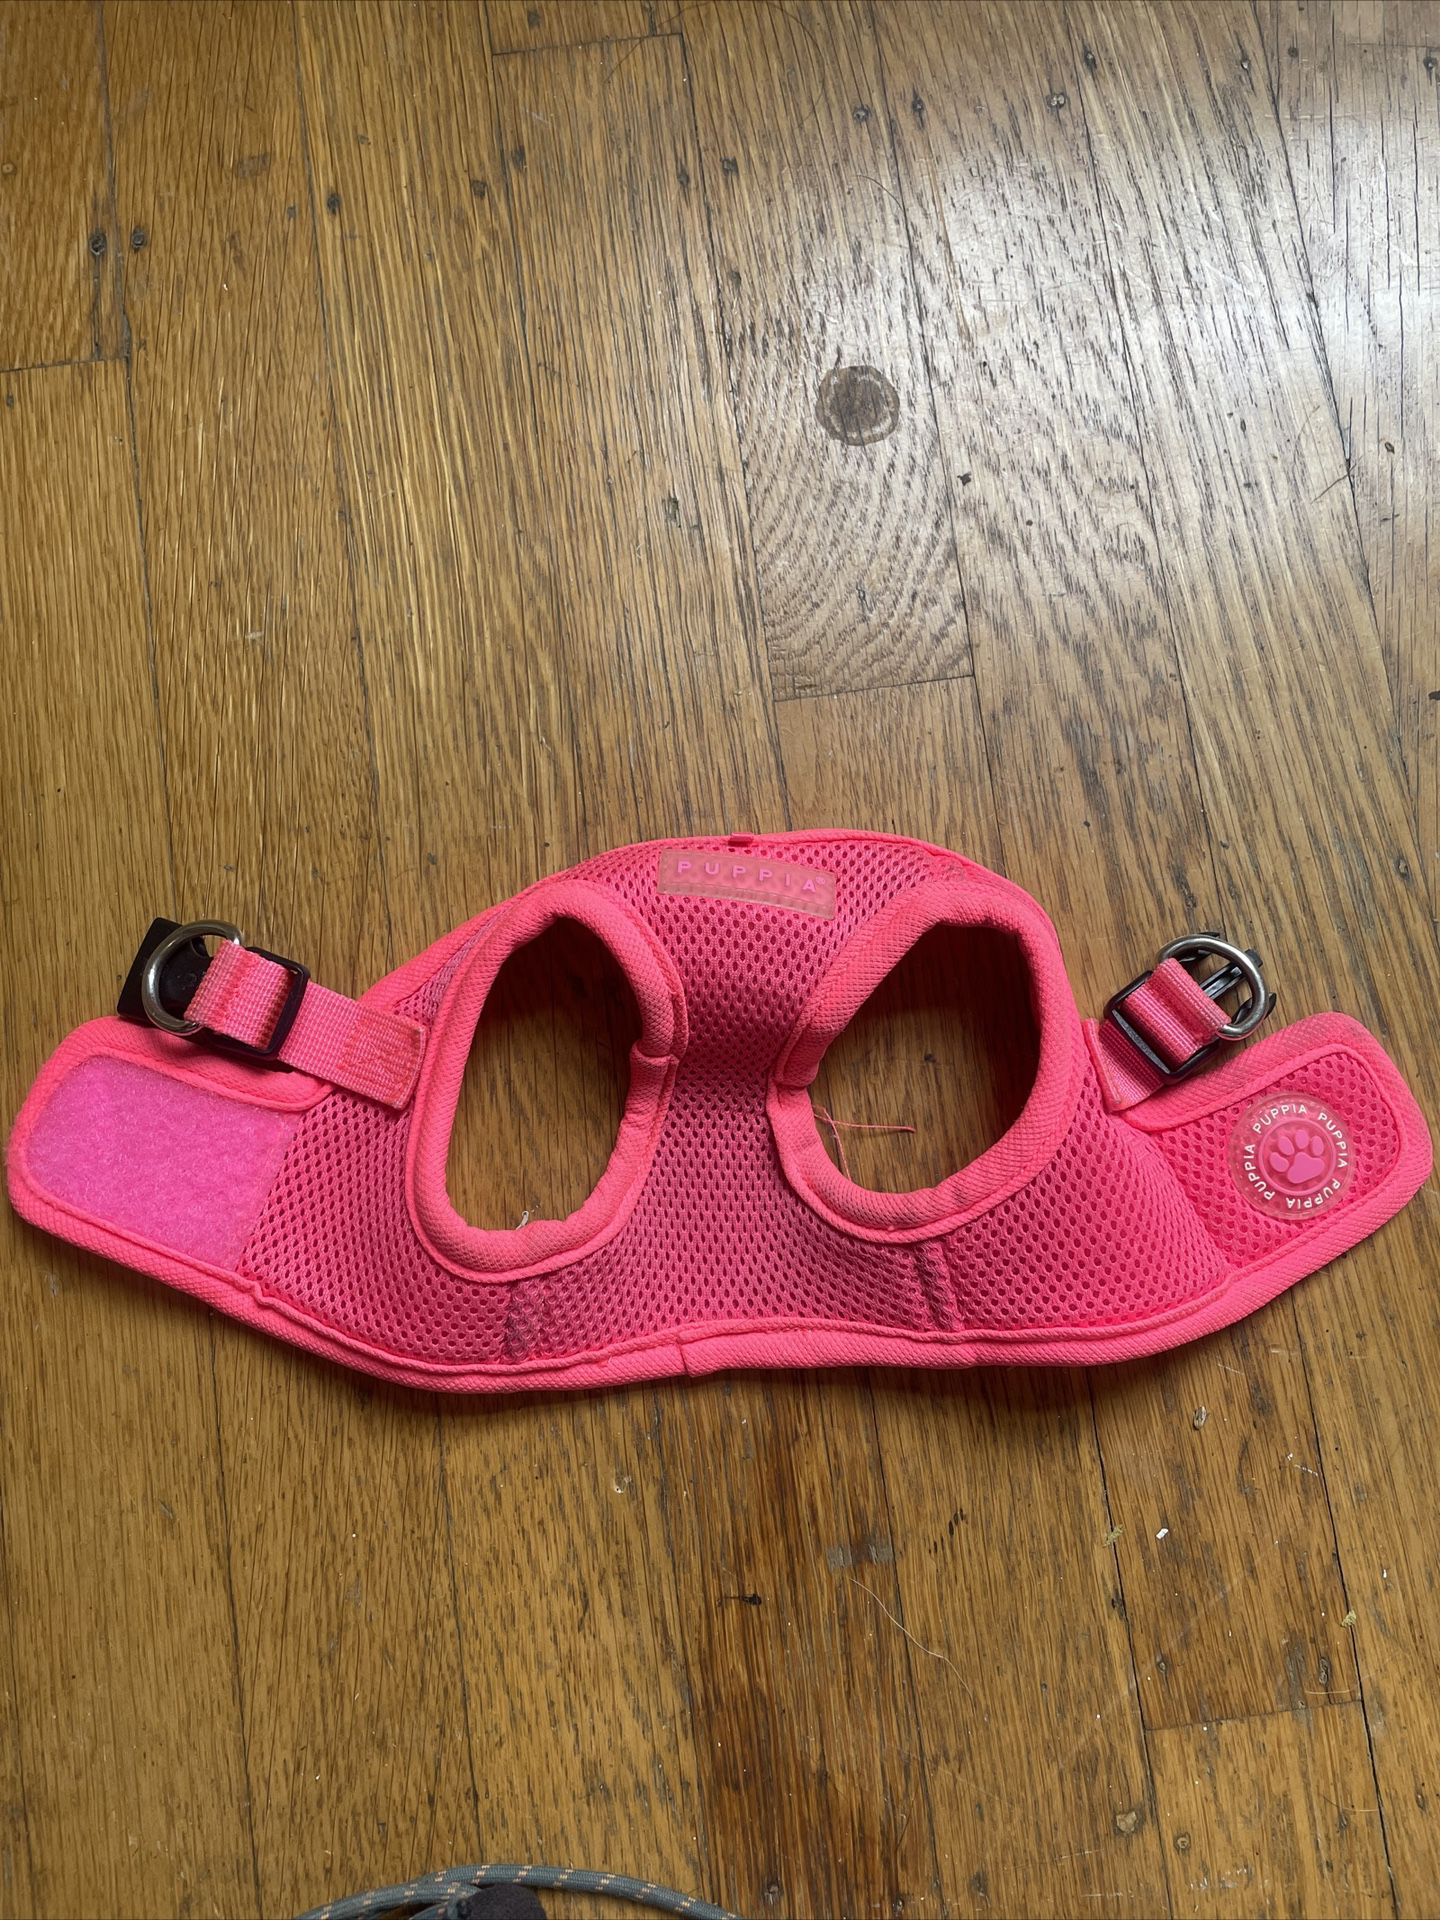 PUPPIA Dog Harness Small Hot Bright Pink Visible Neon Walk Collar NEW- Used Once